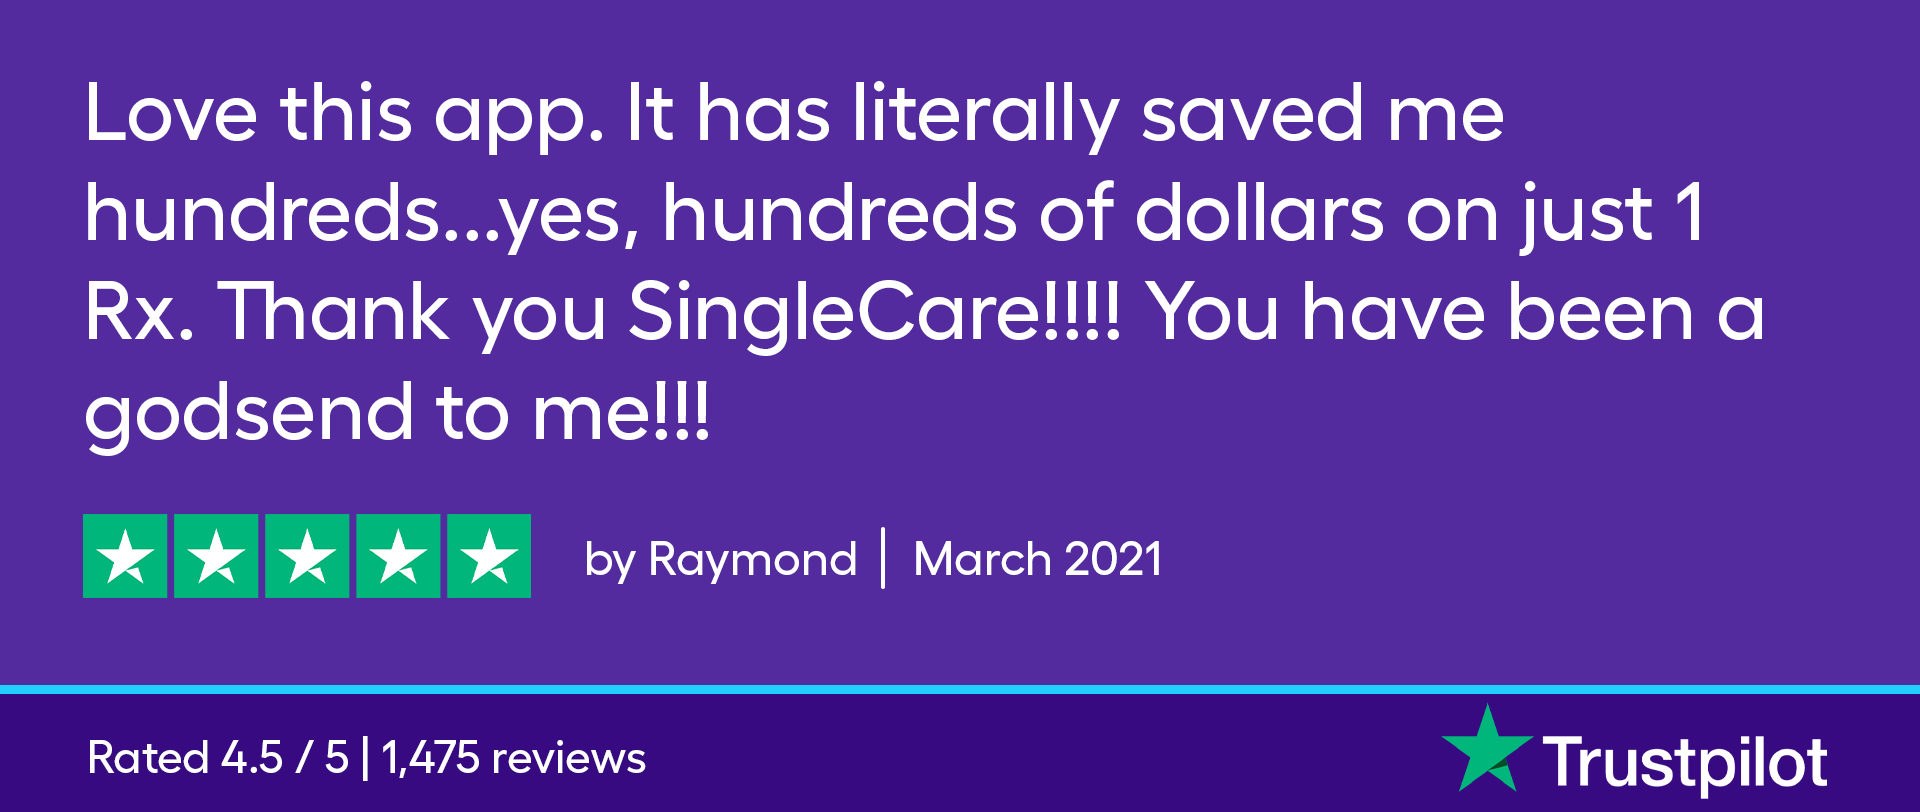 Love this app. It has literally saved me hundreds...yes, hundreds of dollars on just 1 Rx. Thank you SingleCare!!!! You have been a godsend to me!!!